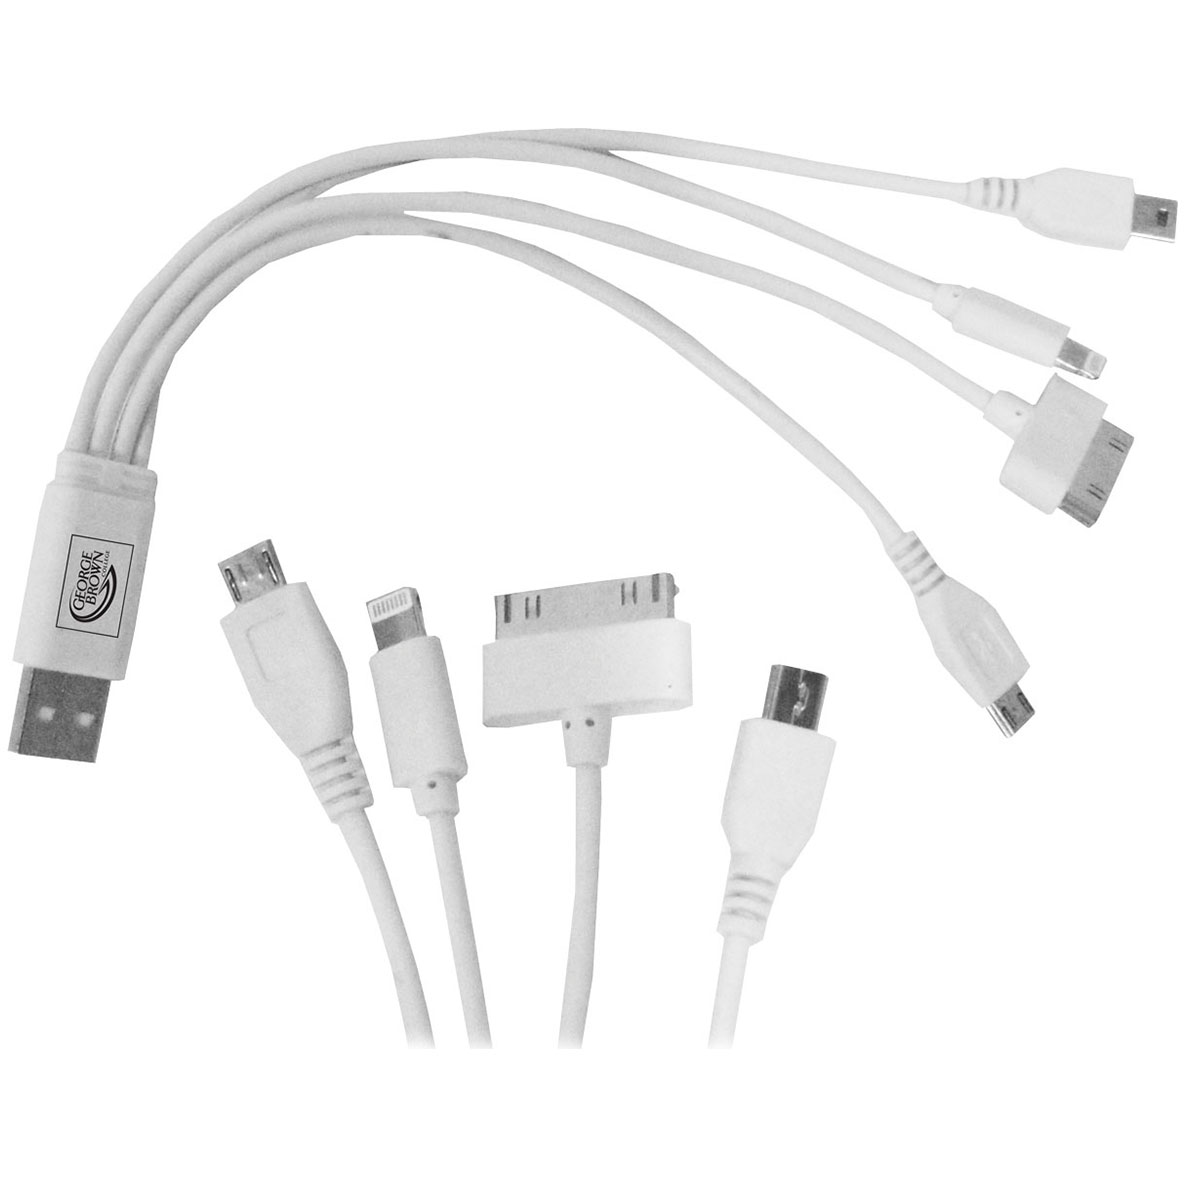 4 in 1 USB Charging Cable